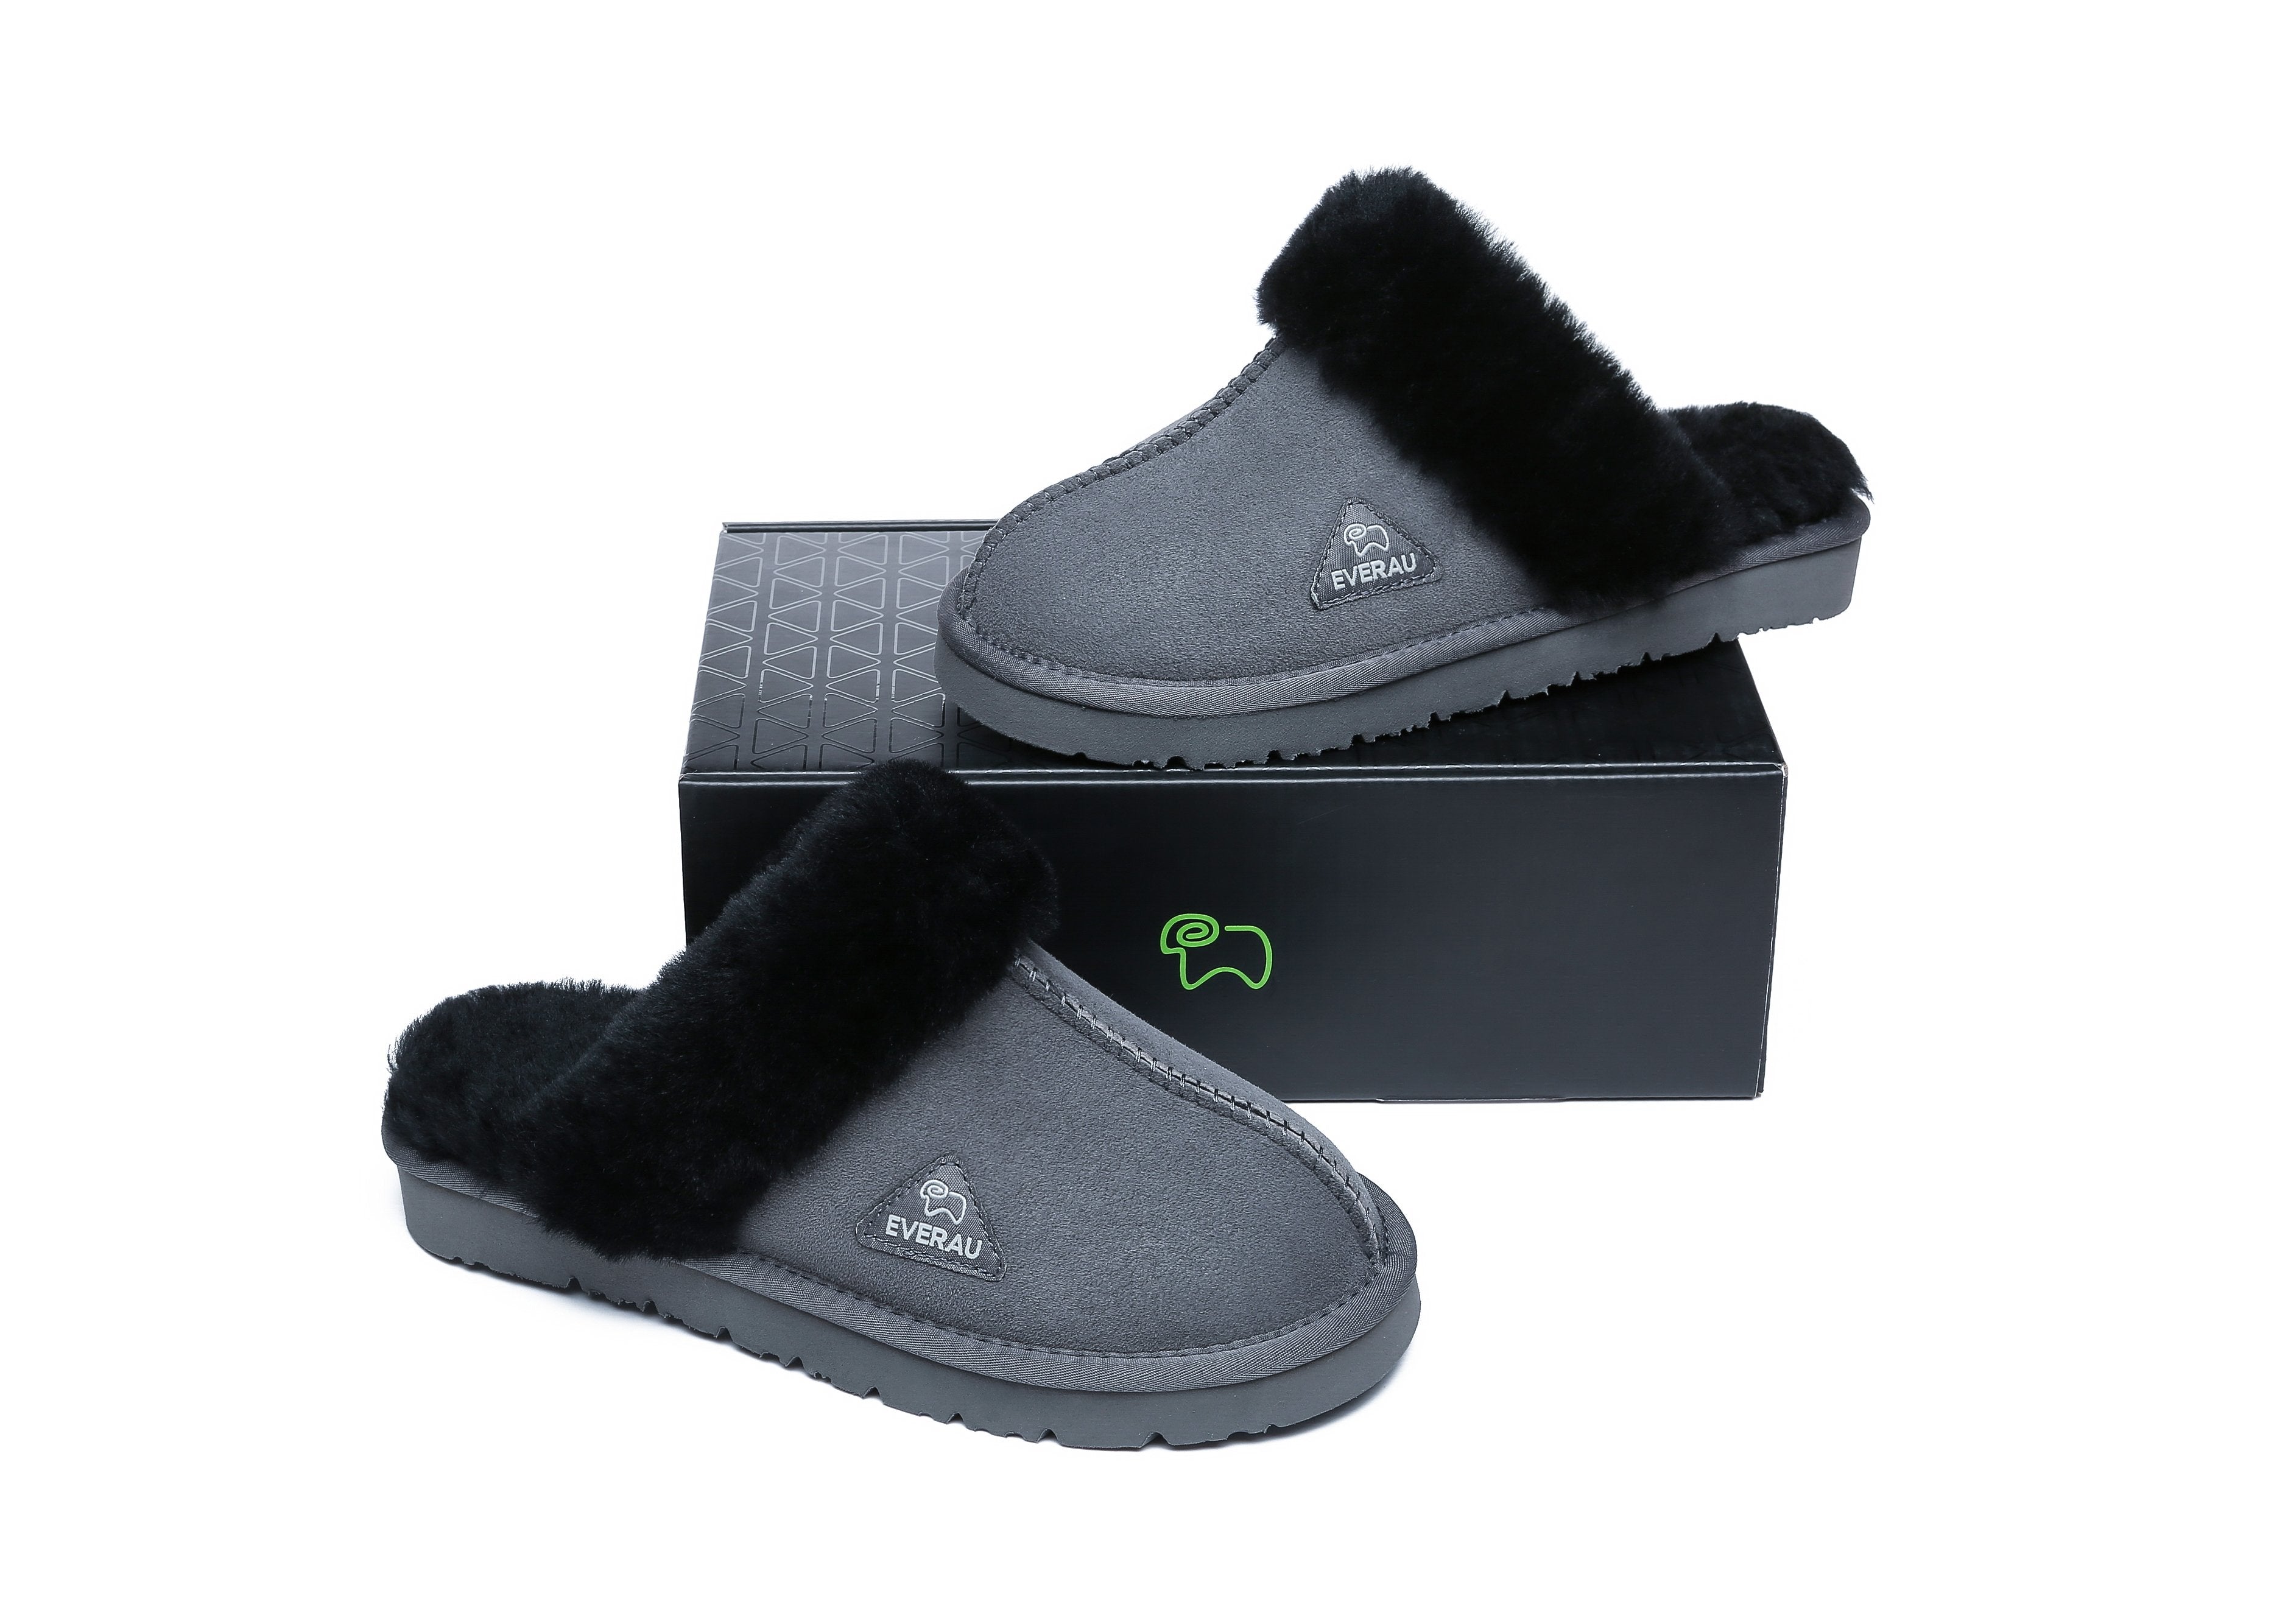 UGG Slippers Muffin Limited Edition